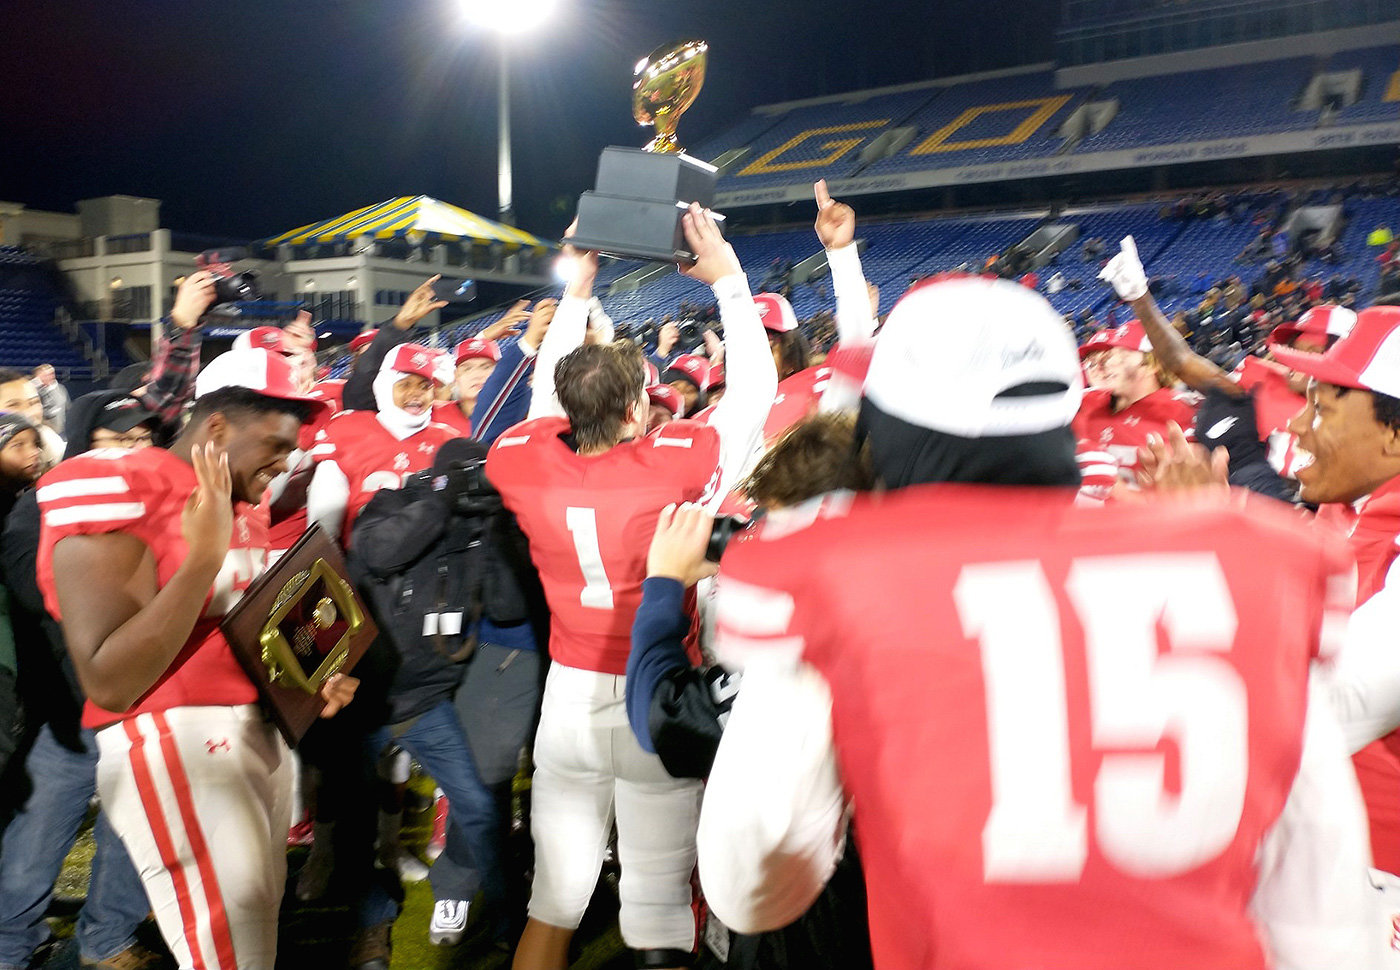 Archbishop Spalding's senior linebacker PJ Poknis raised the MIAA championship trophy on November 18 after the Cavaliers beat Calvert Hall 34-10 in a game played at the Navy-Marine Corps Memorial Stadium in Annapolis.